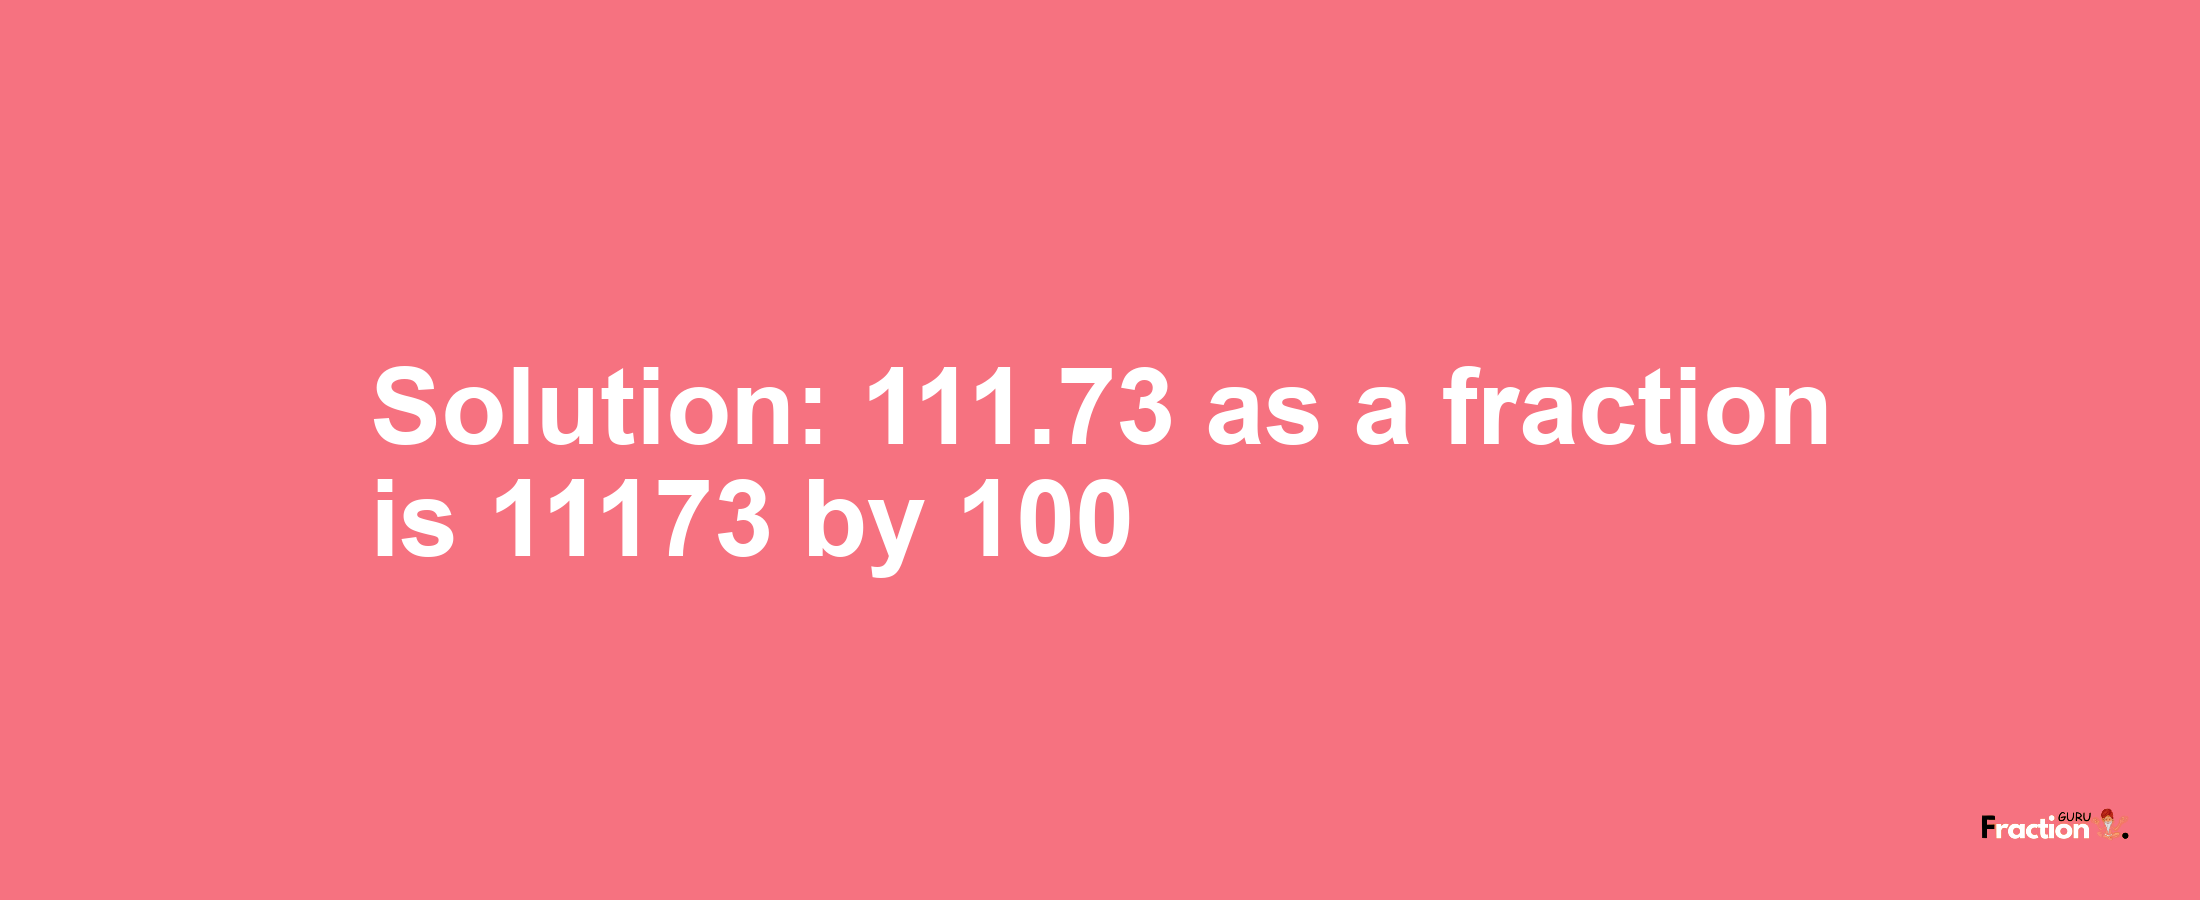 Solution:111.73 as a fraction is 11173/100